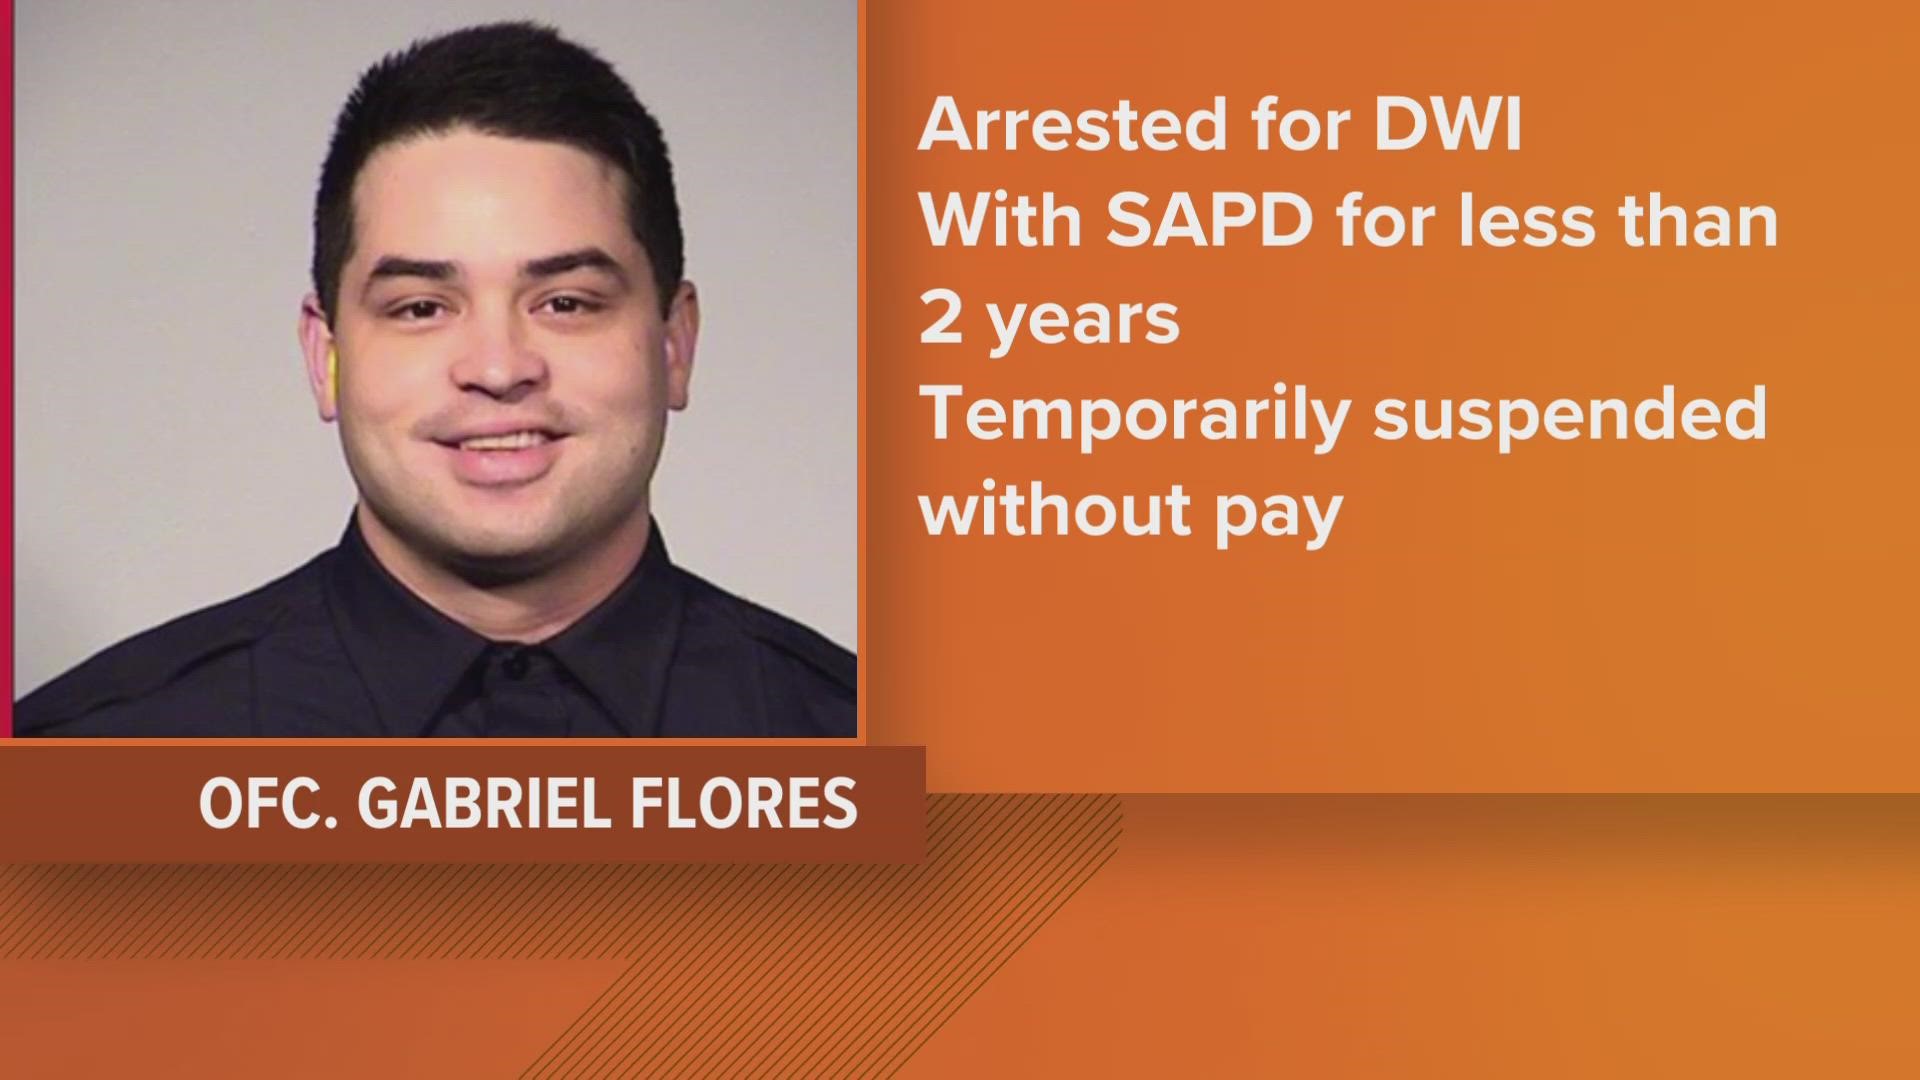 The off-duty officer was originally arrested for speeding and the officer who pulled him over saw signs of intoxication, SAPD said.